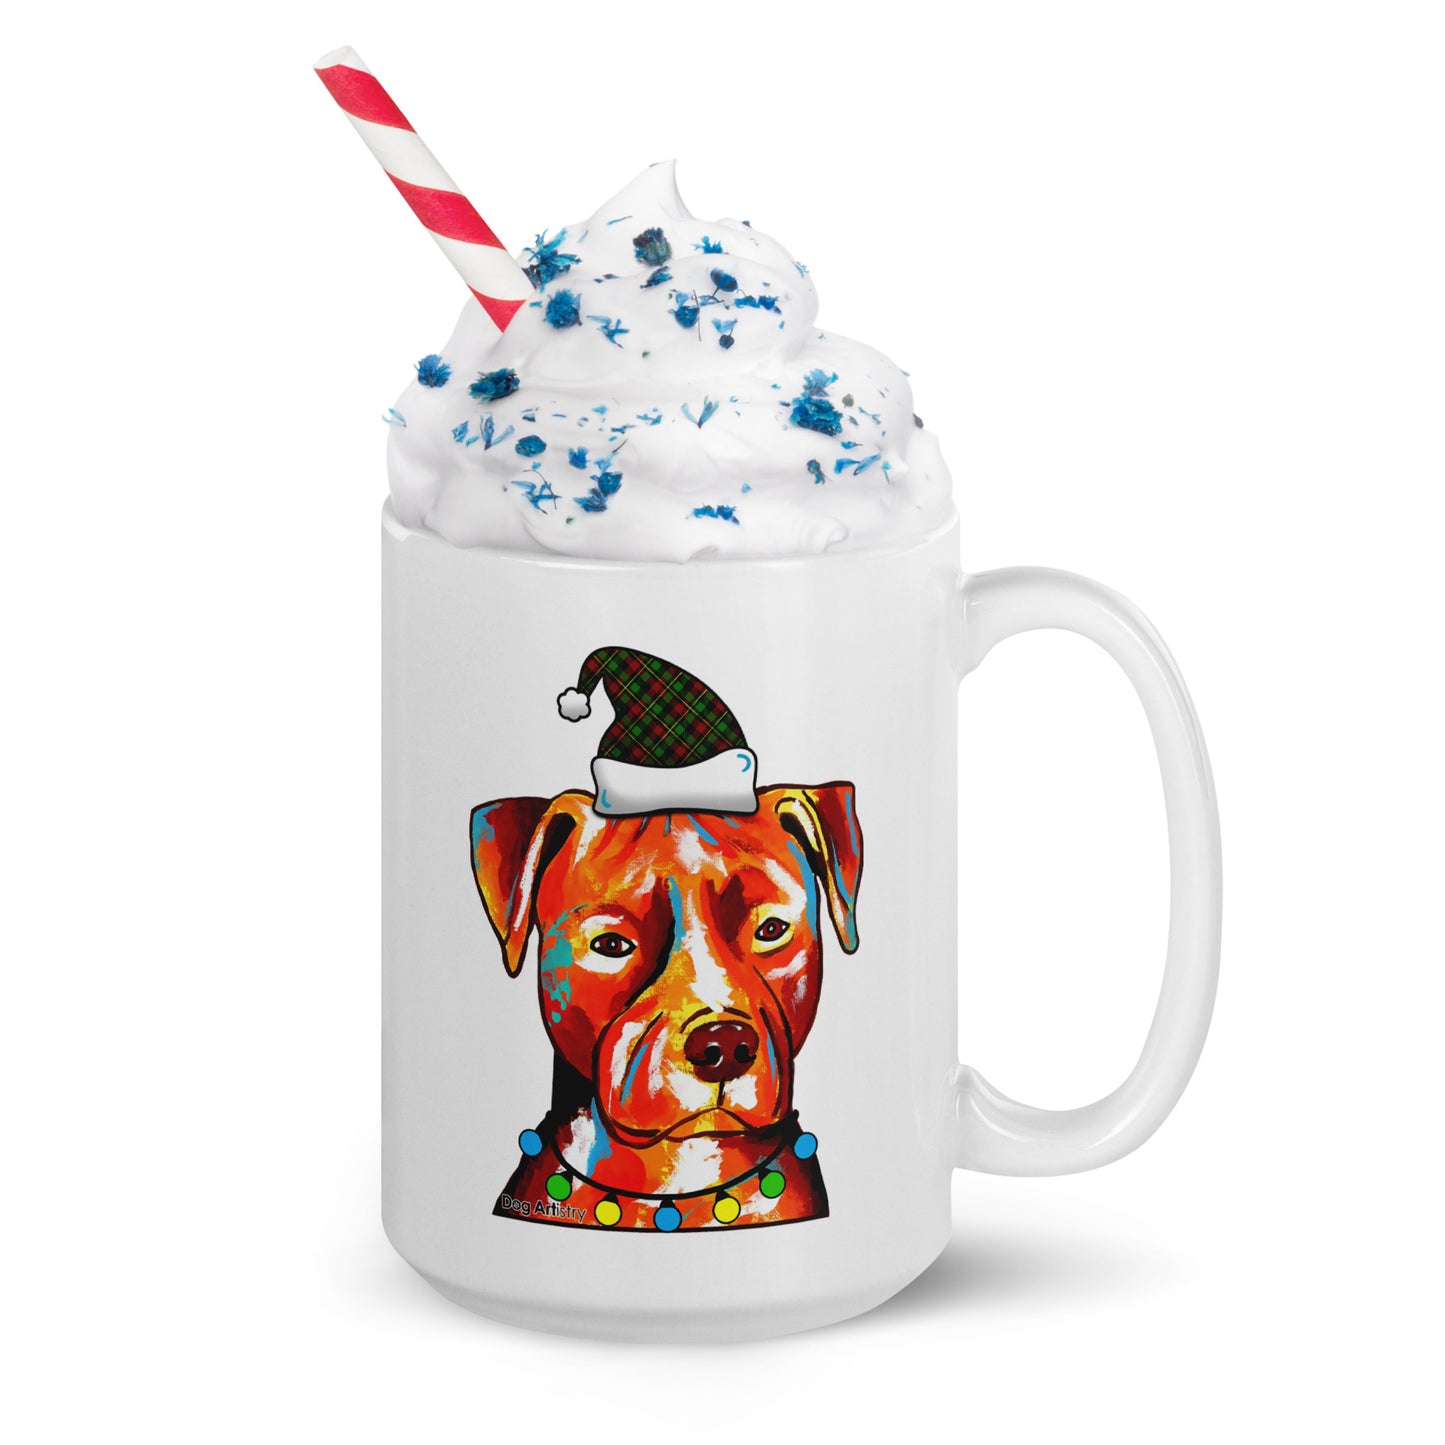 Amstaff - Pit Bull This Is As Jolly As I Get Holiday Coffee Mug by Dog Artistry